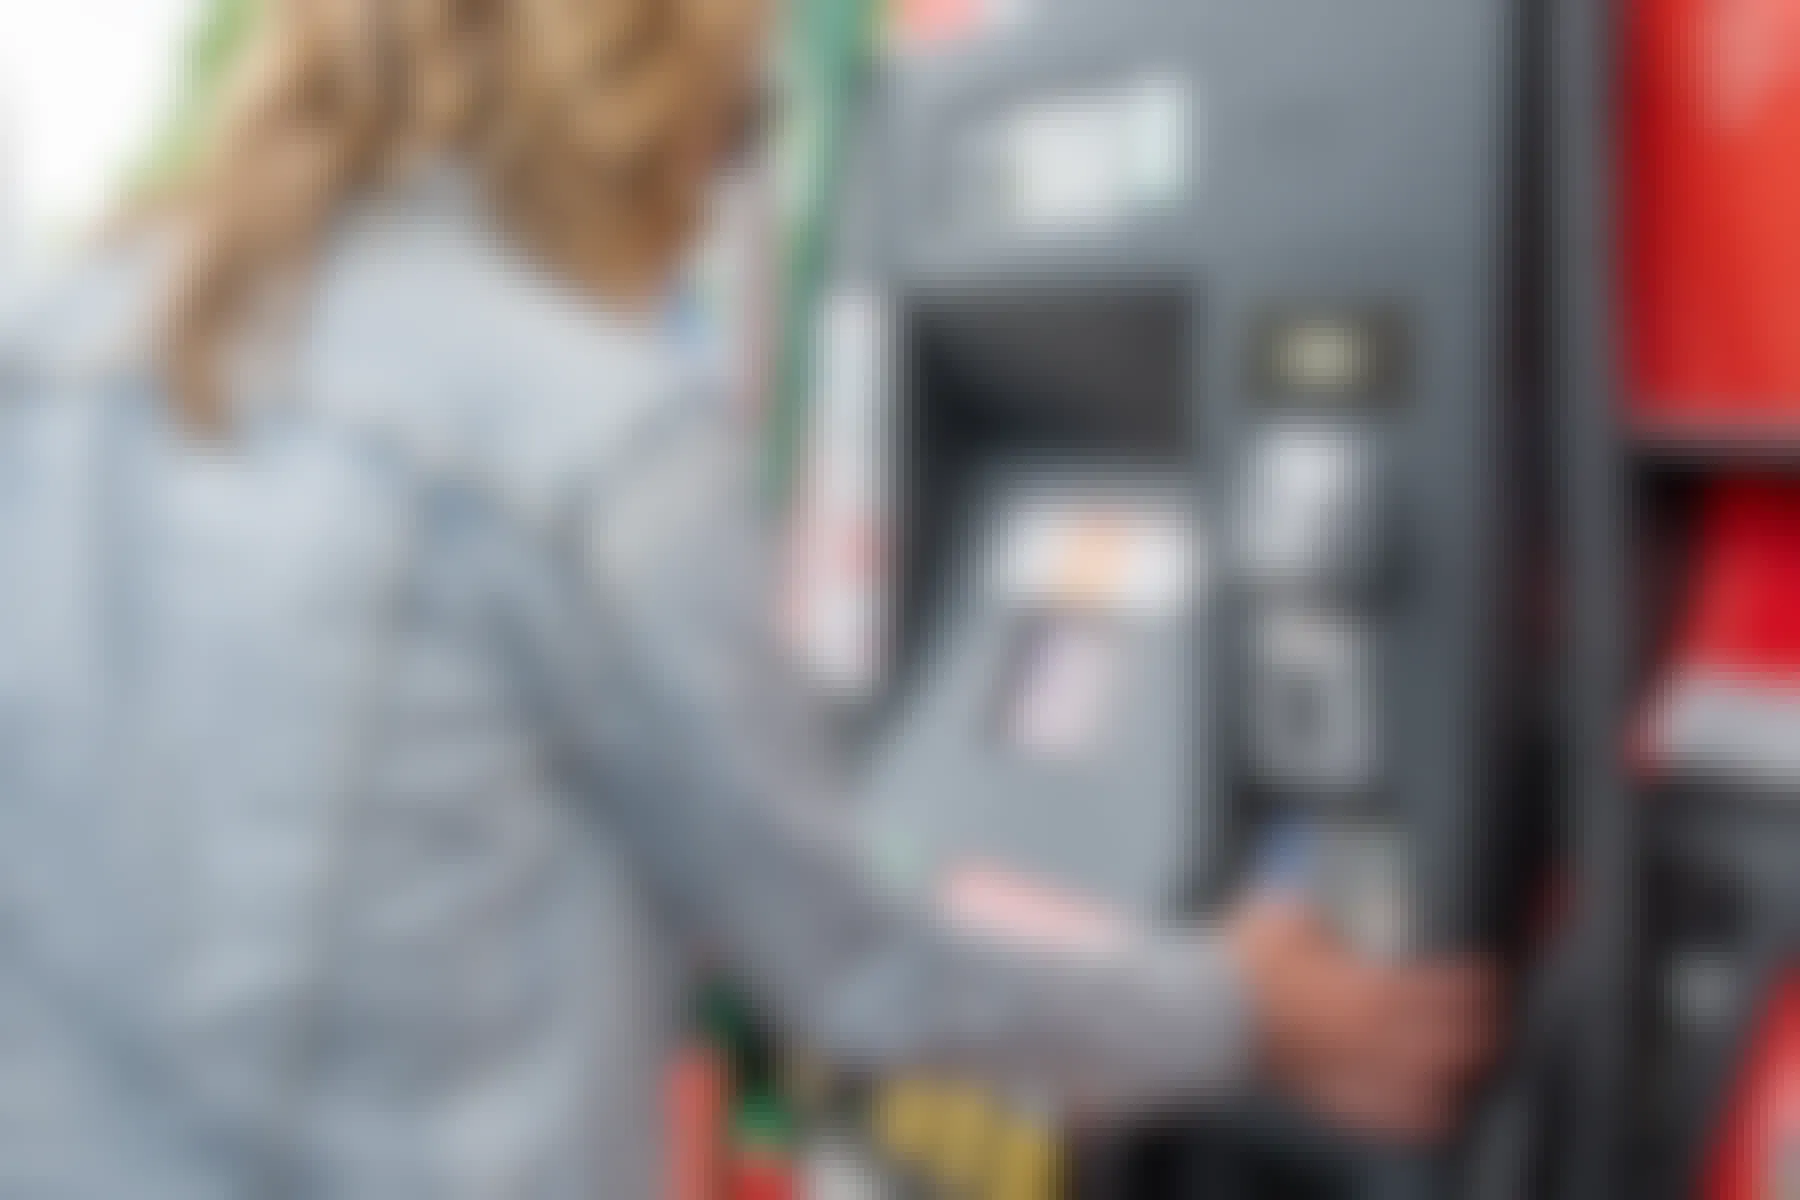 A woman putting in credit card info at the gas pump.